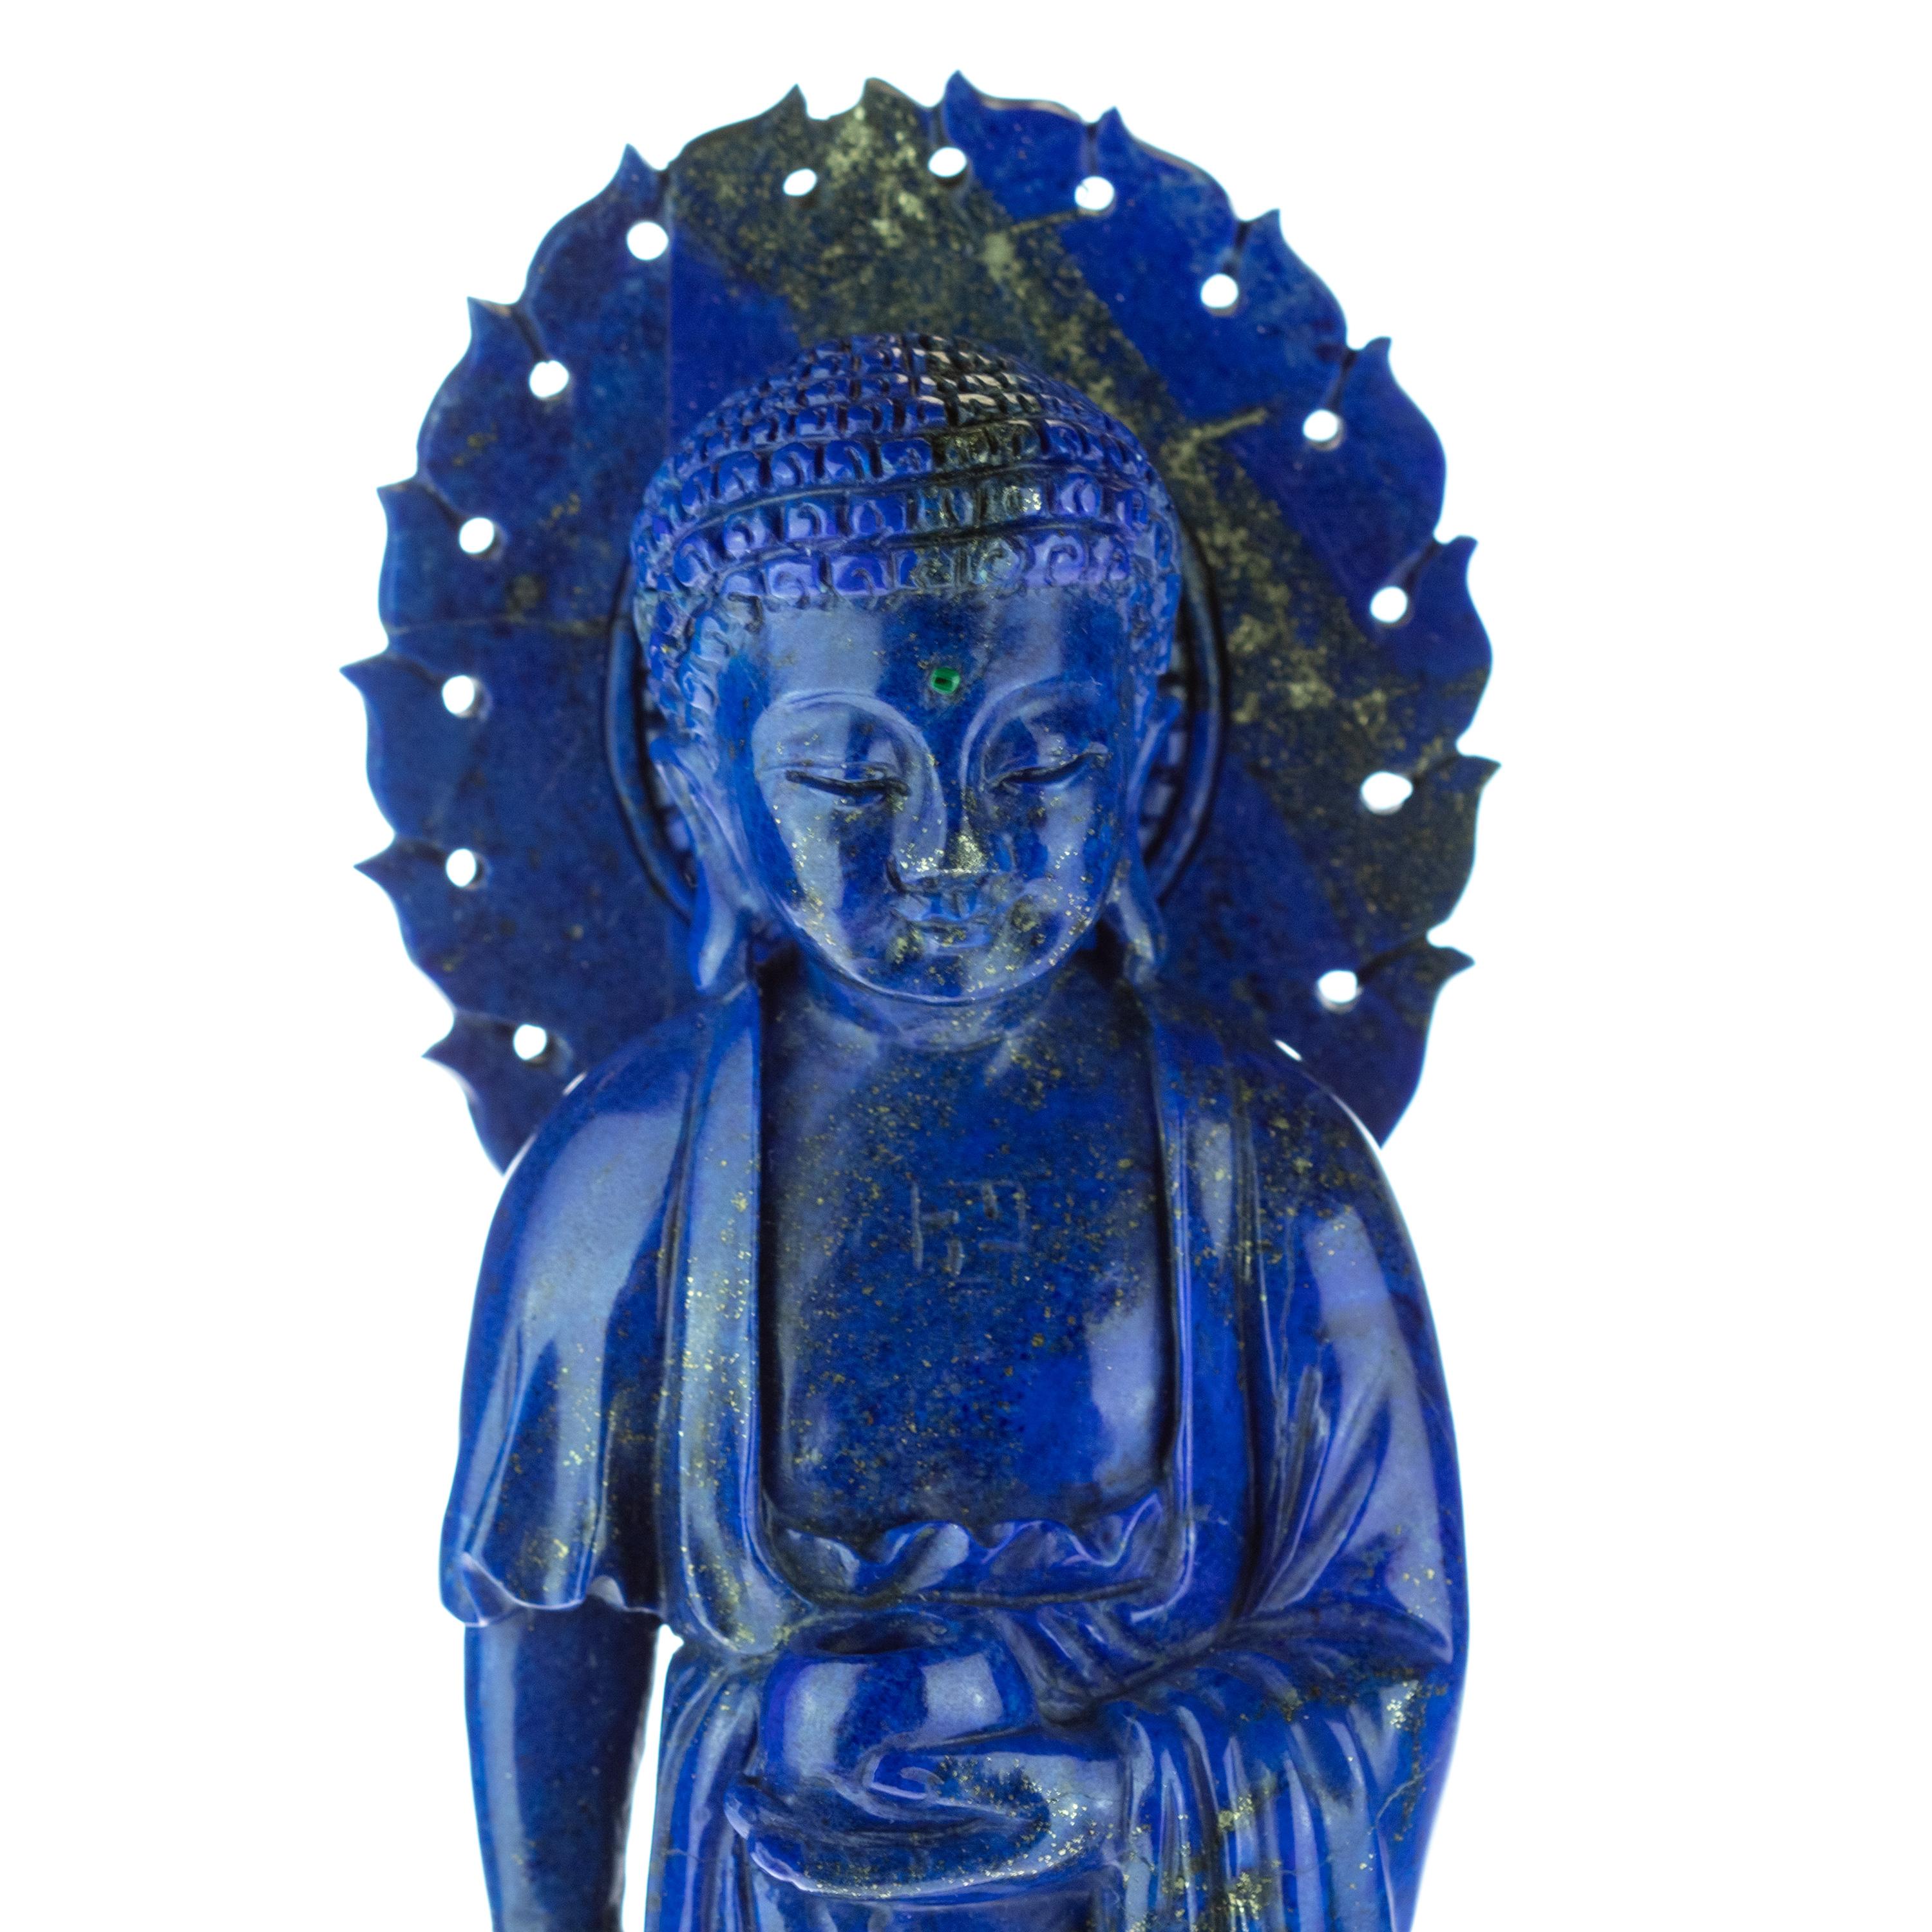 Hand-Carved Lapis Lazuli Guanyin Bodhisattva Female Buddha Asian Art Carved Statue Sculpture For Sale